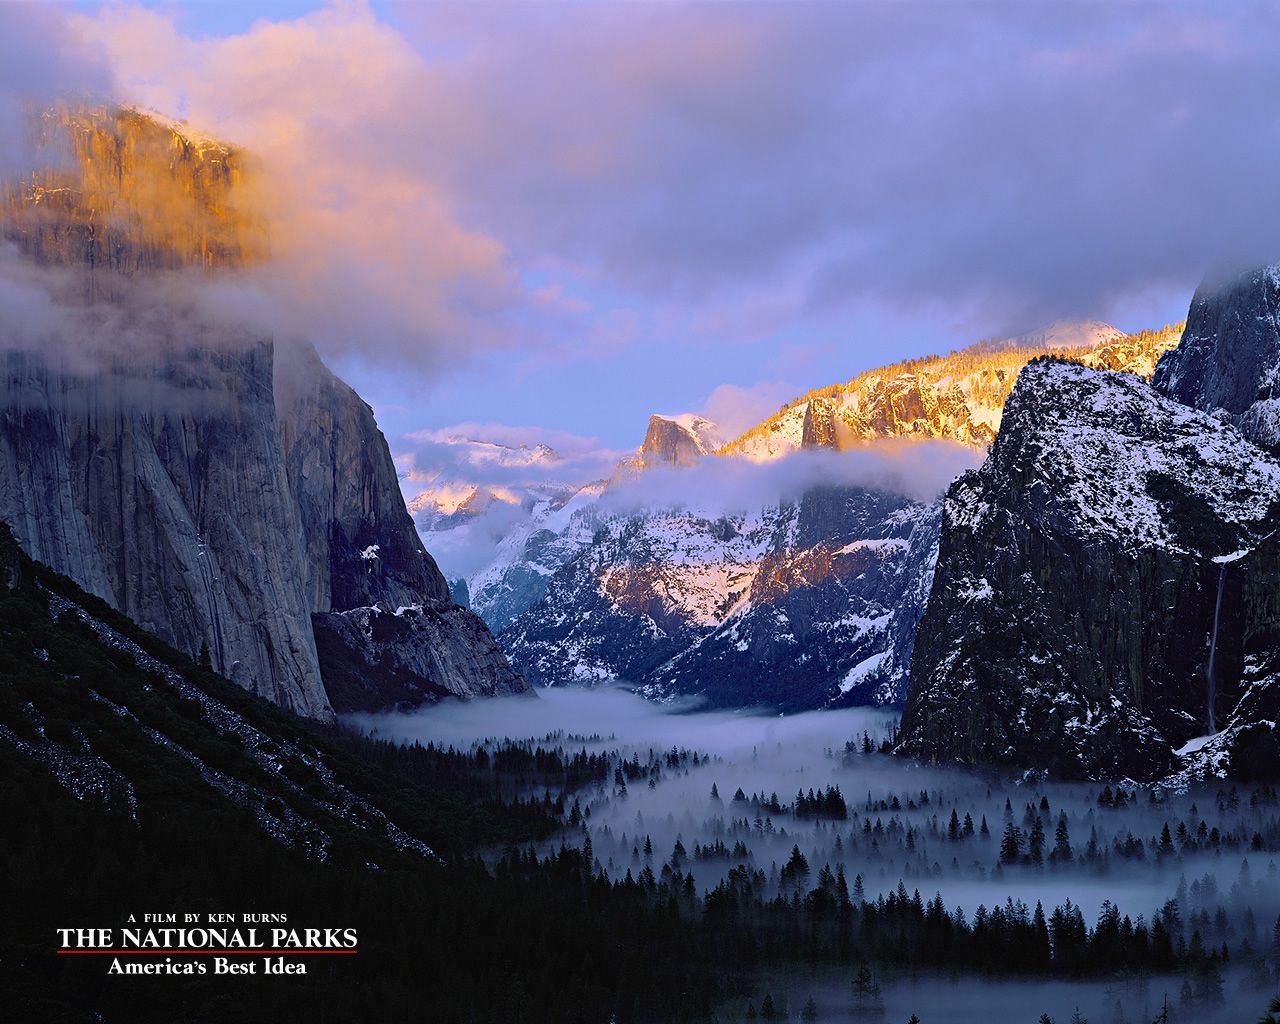 The National Parks: America's Best Idea: Download Wallpapers | PBS